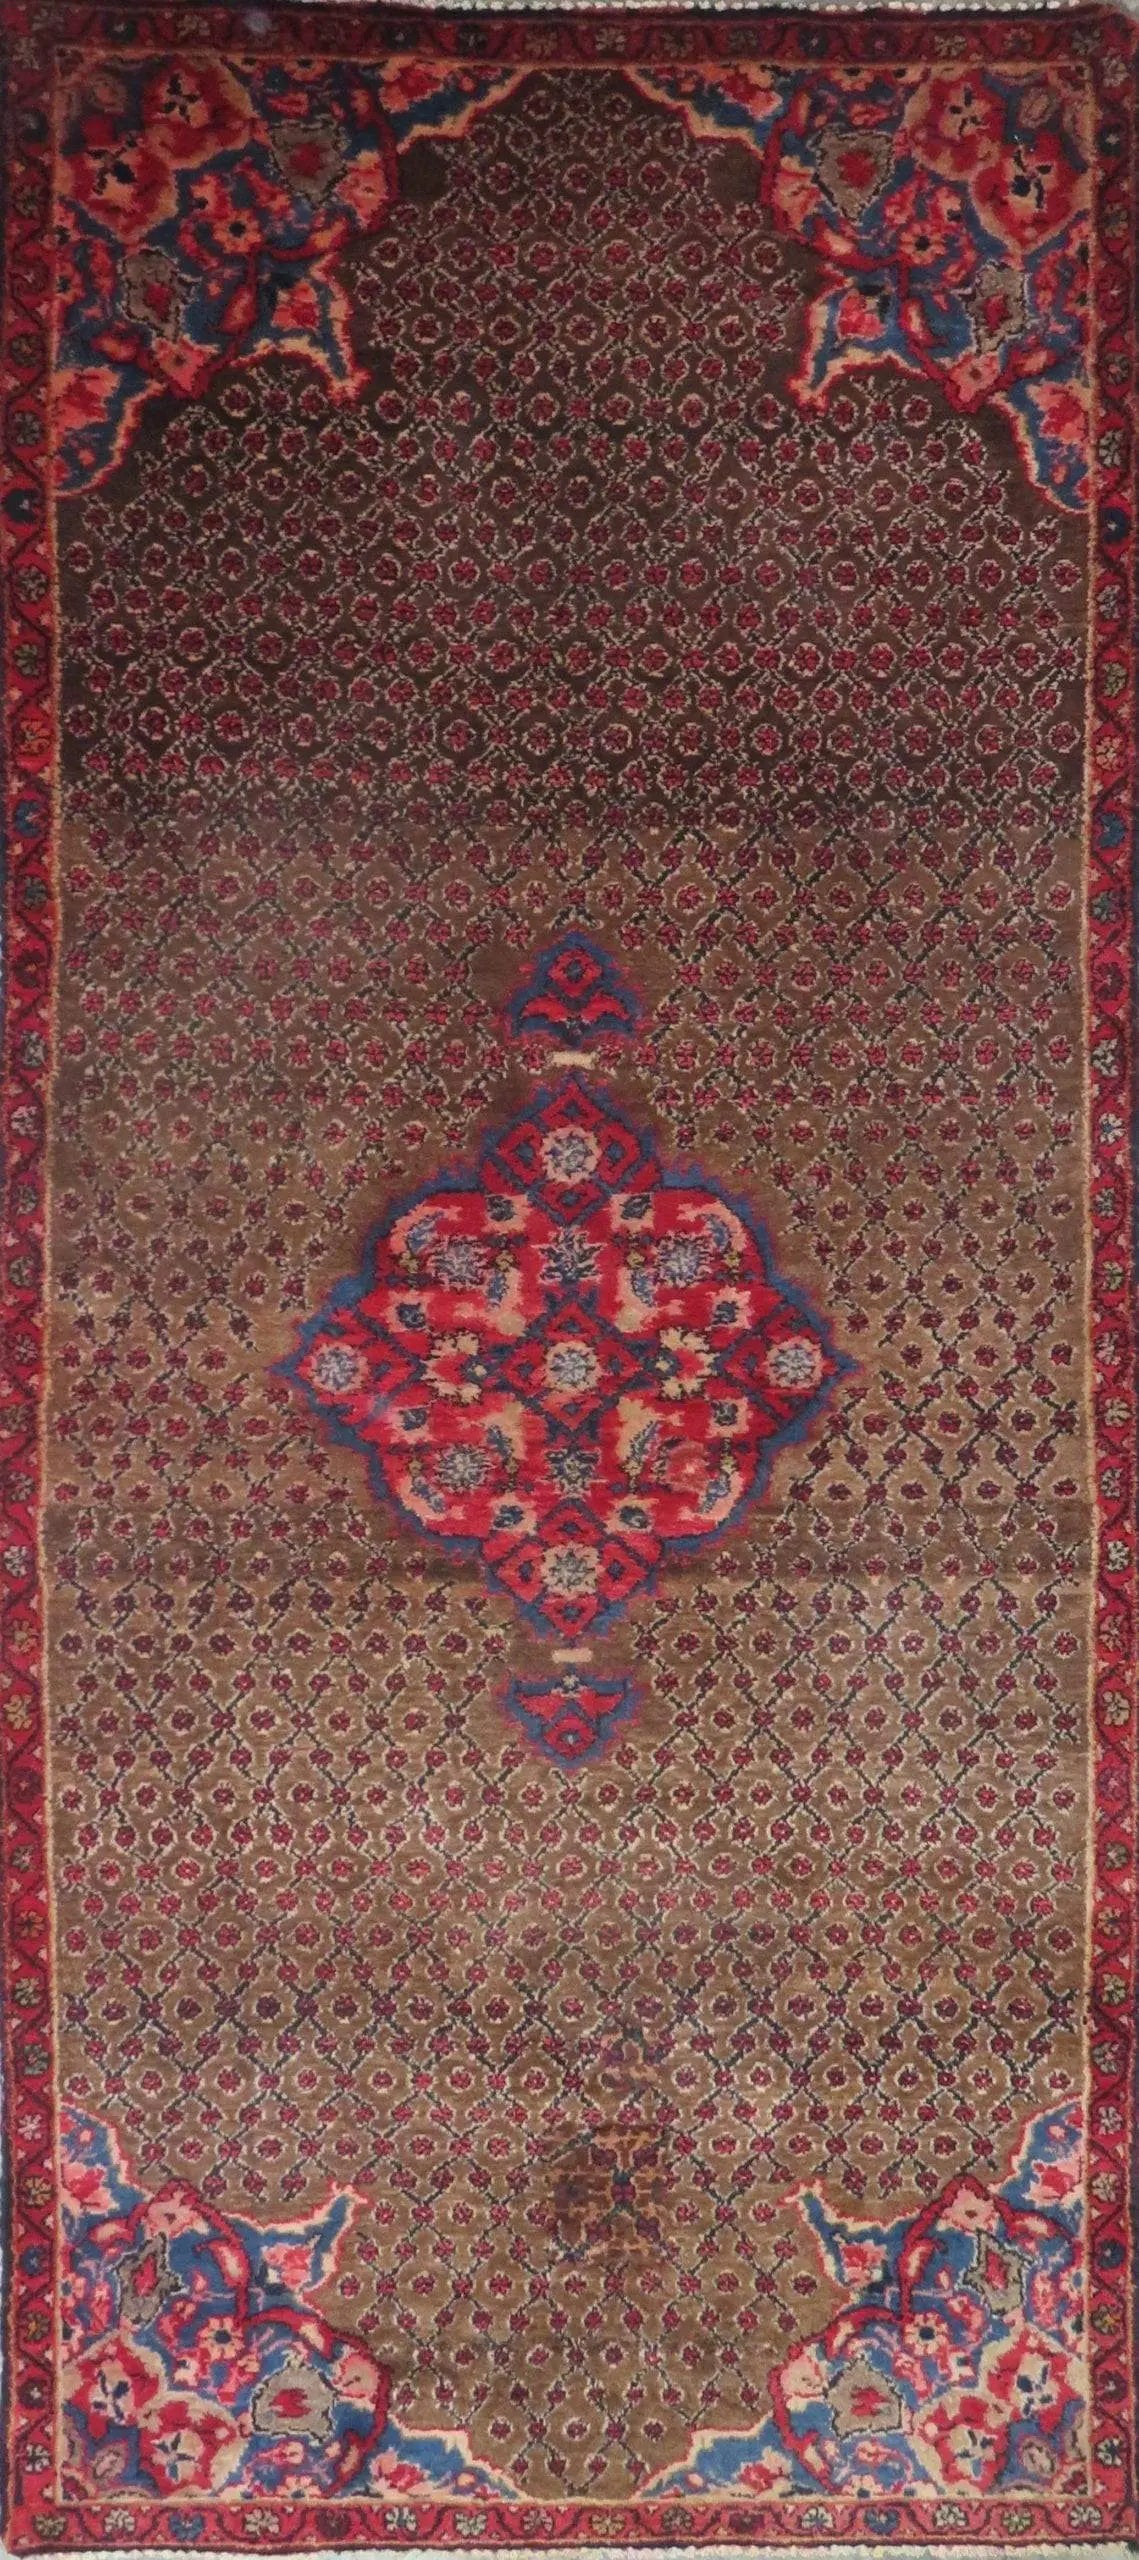 Hand-Knotted Persian Wool Rug _ Luxurious Vintage Design, 5'8" x 4'9", Artisan Crafted